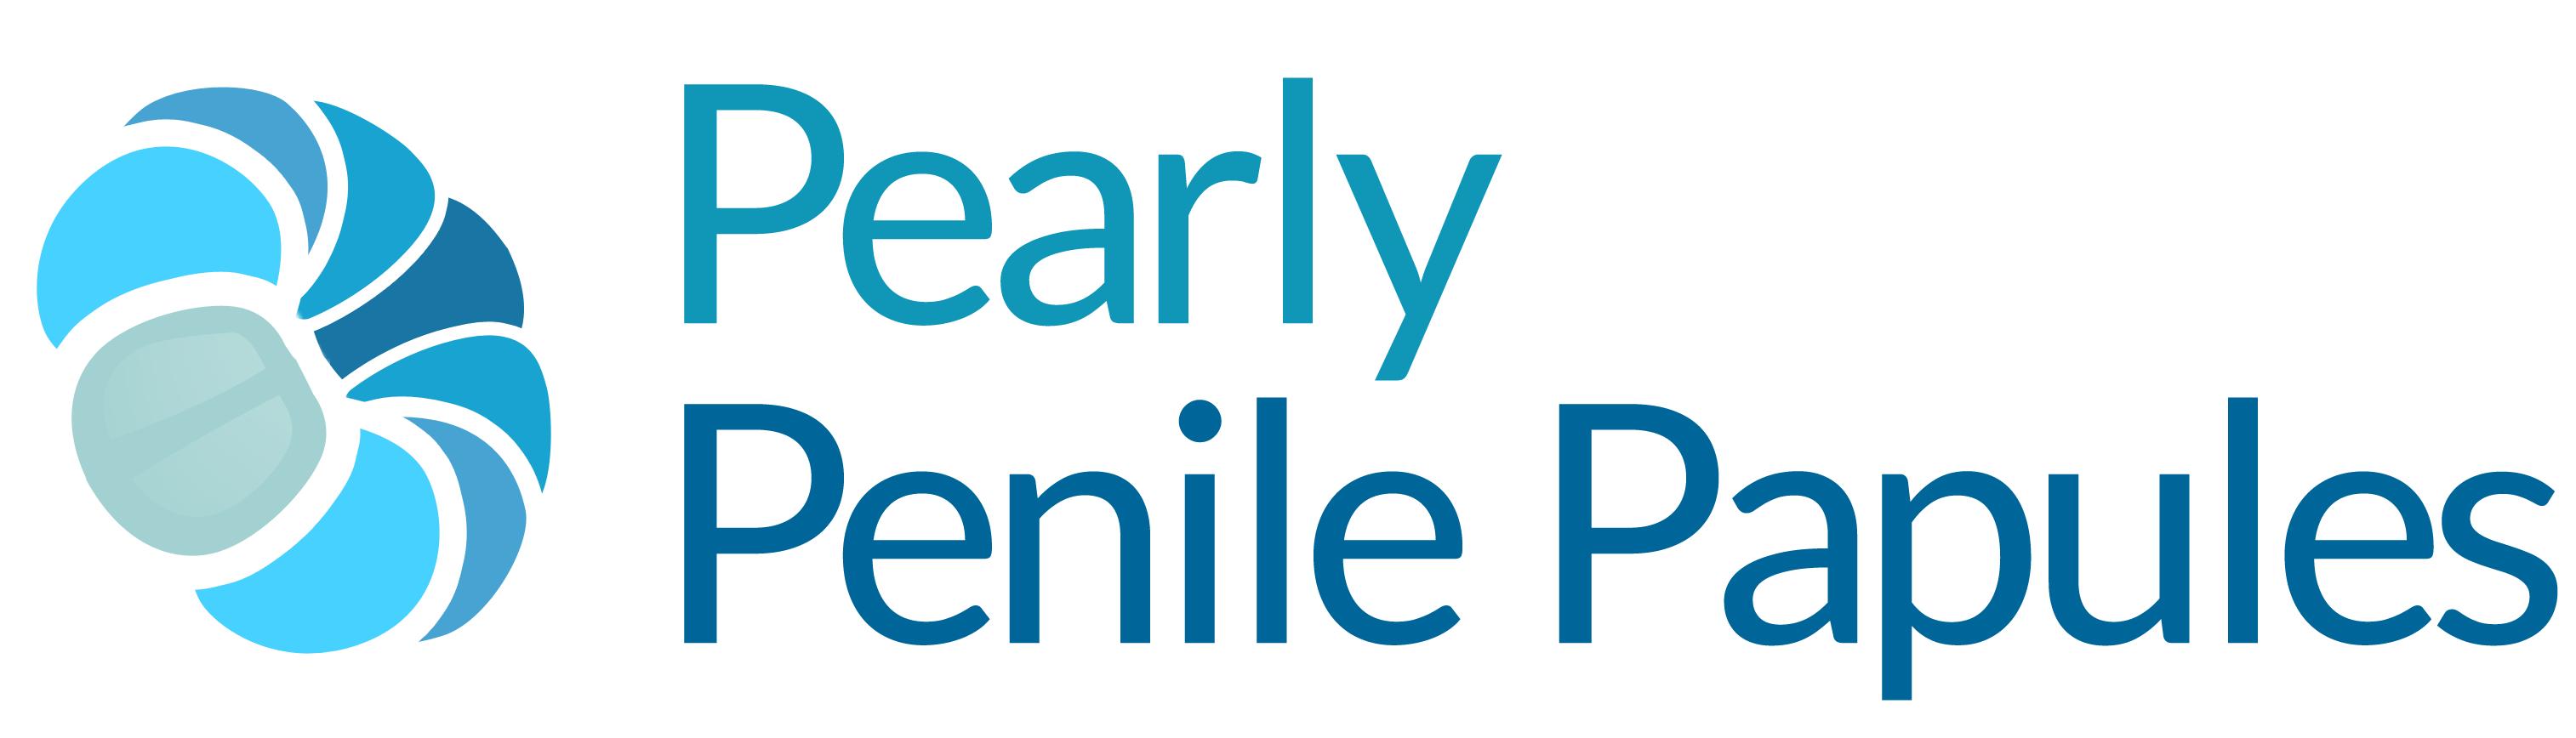 Pearly penile papules surgery